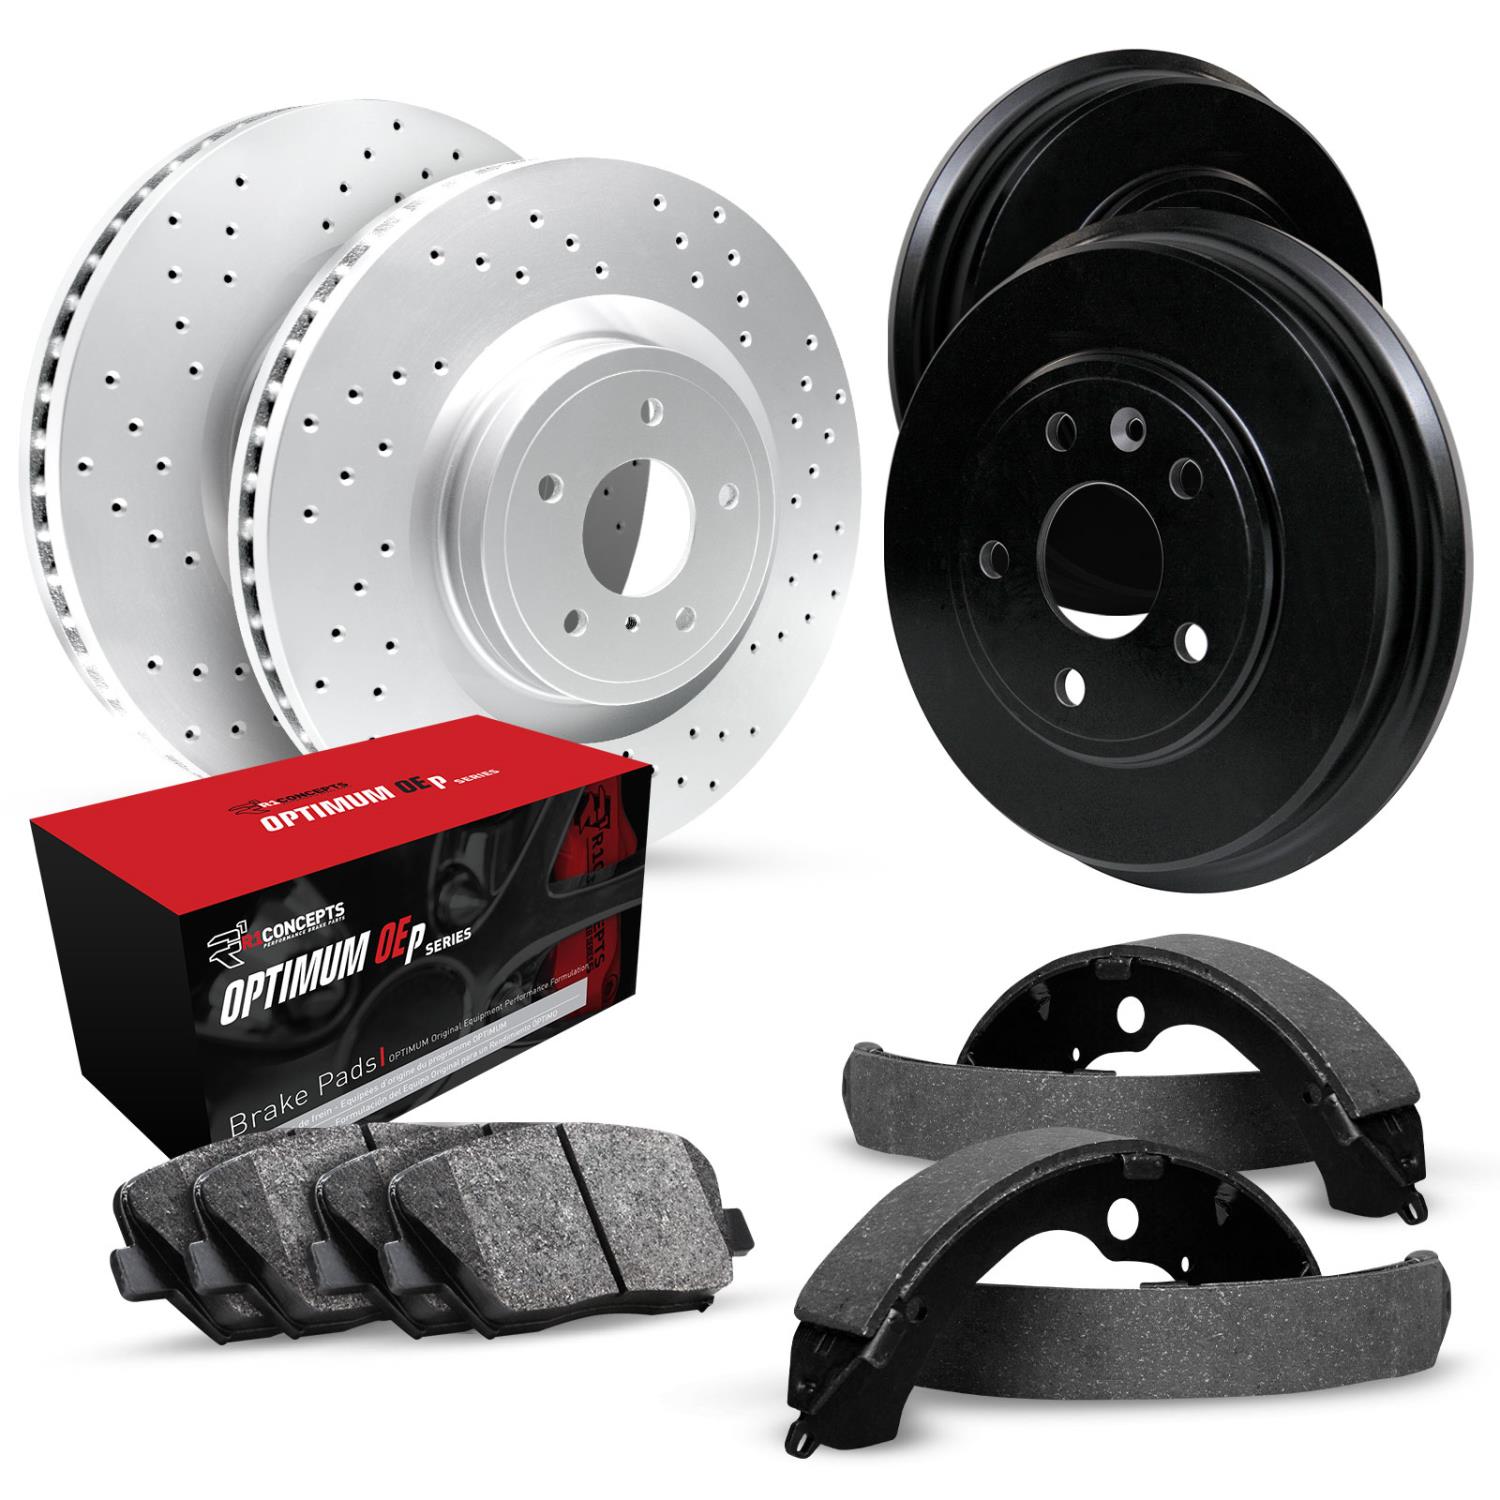 GEO-Carbon Drilled Brake Rotor & Drum Set w/Optimum OE Pads & Shoes, 1974-1975 GM, Position: Front & Rear